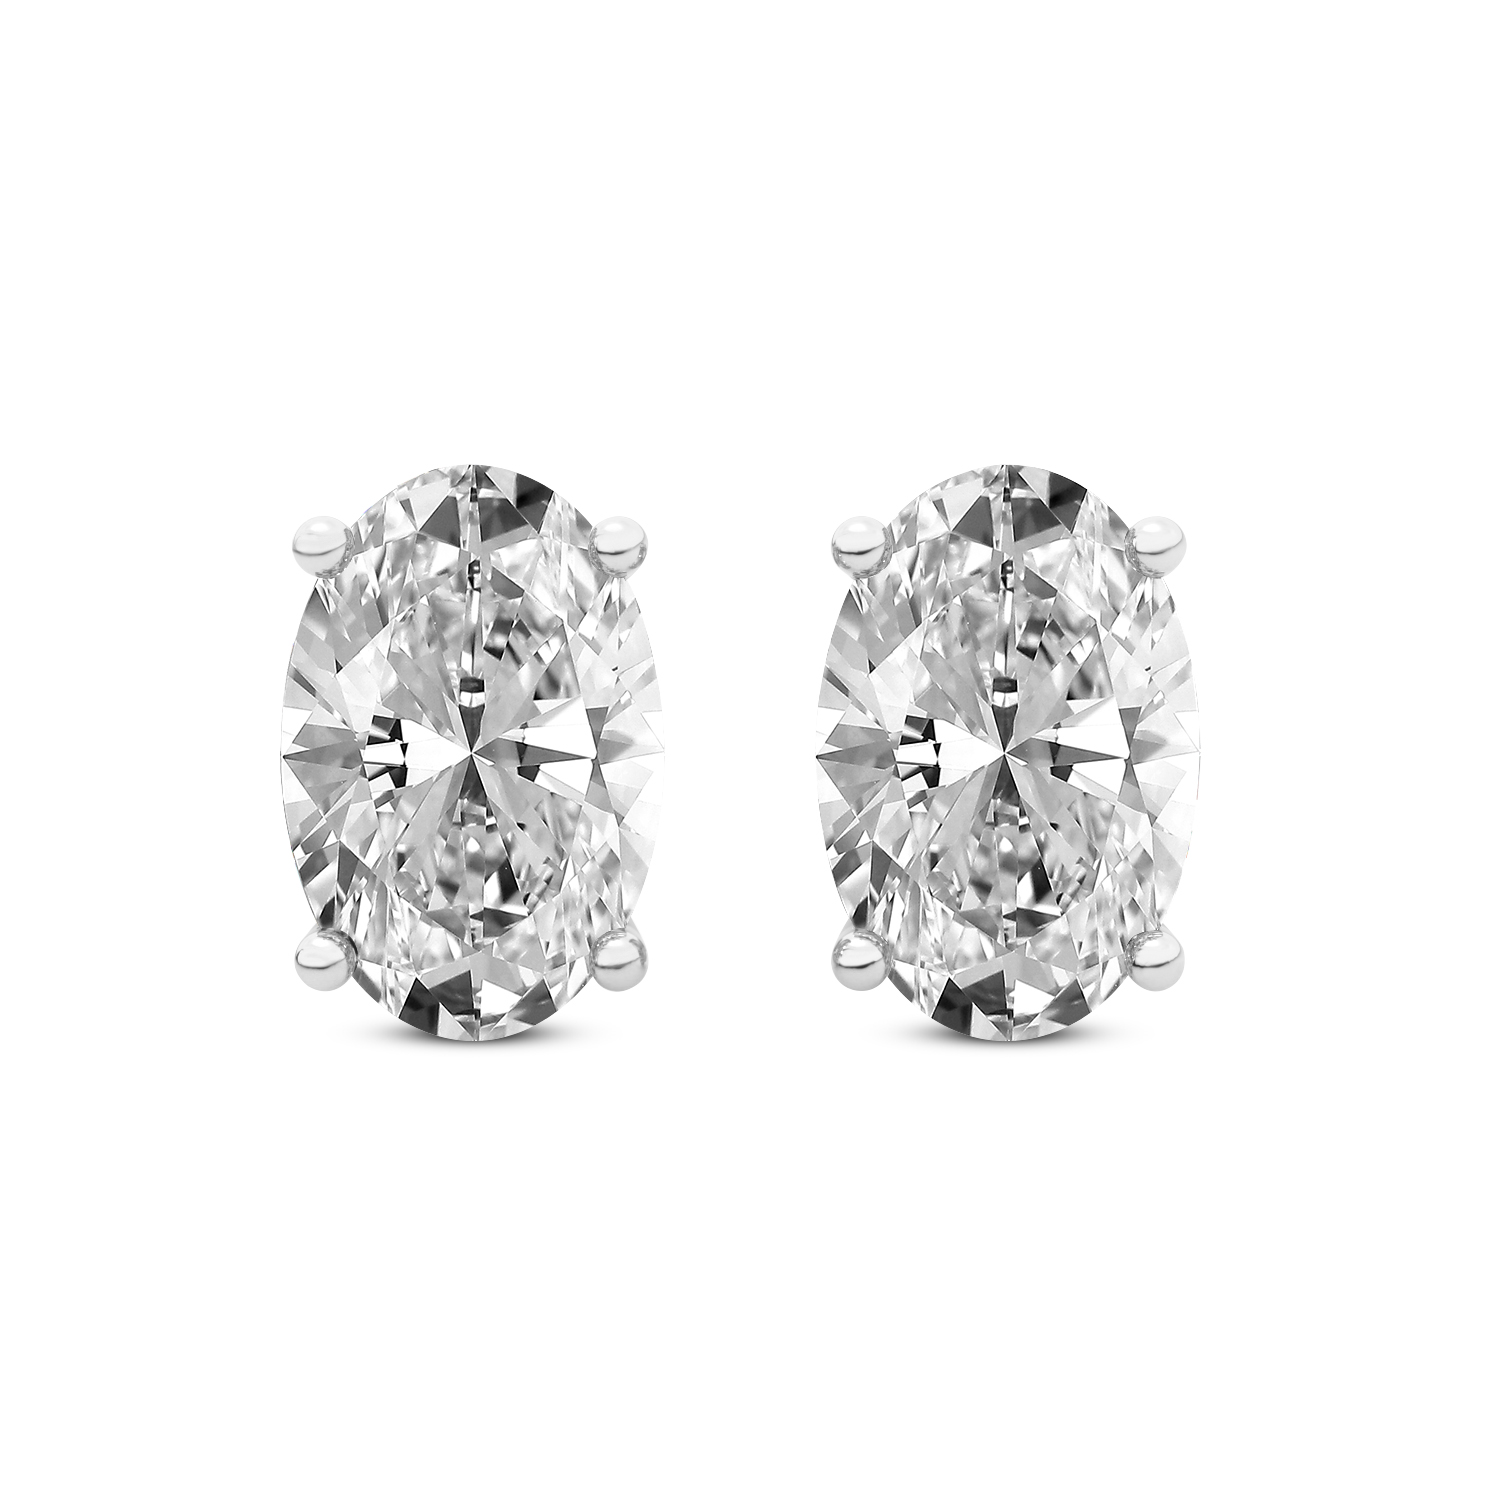 4 Prong Oval Lab Diamond Stud Earrings white gold earring, small front view